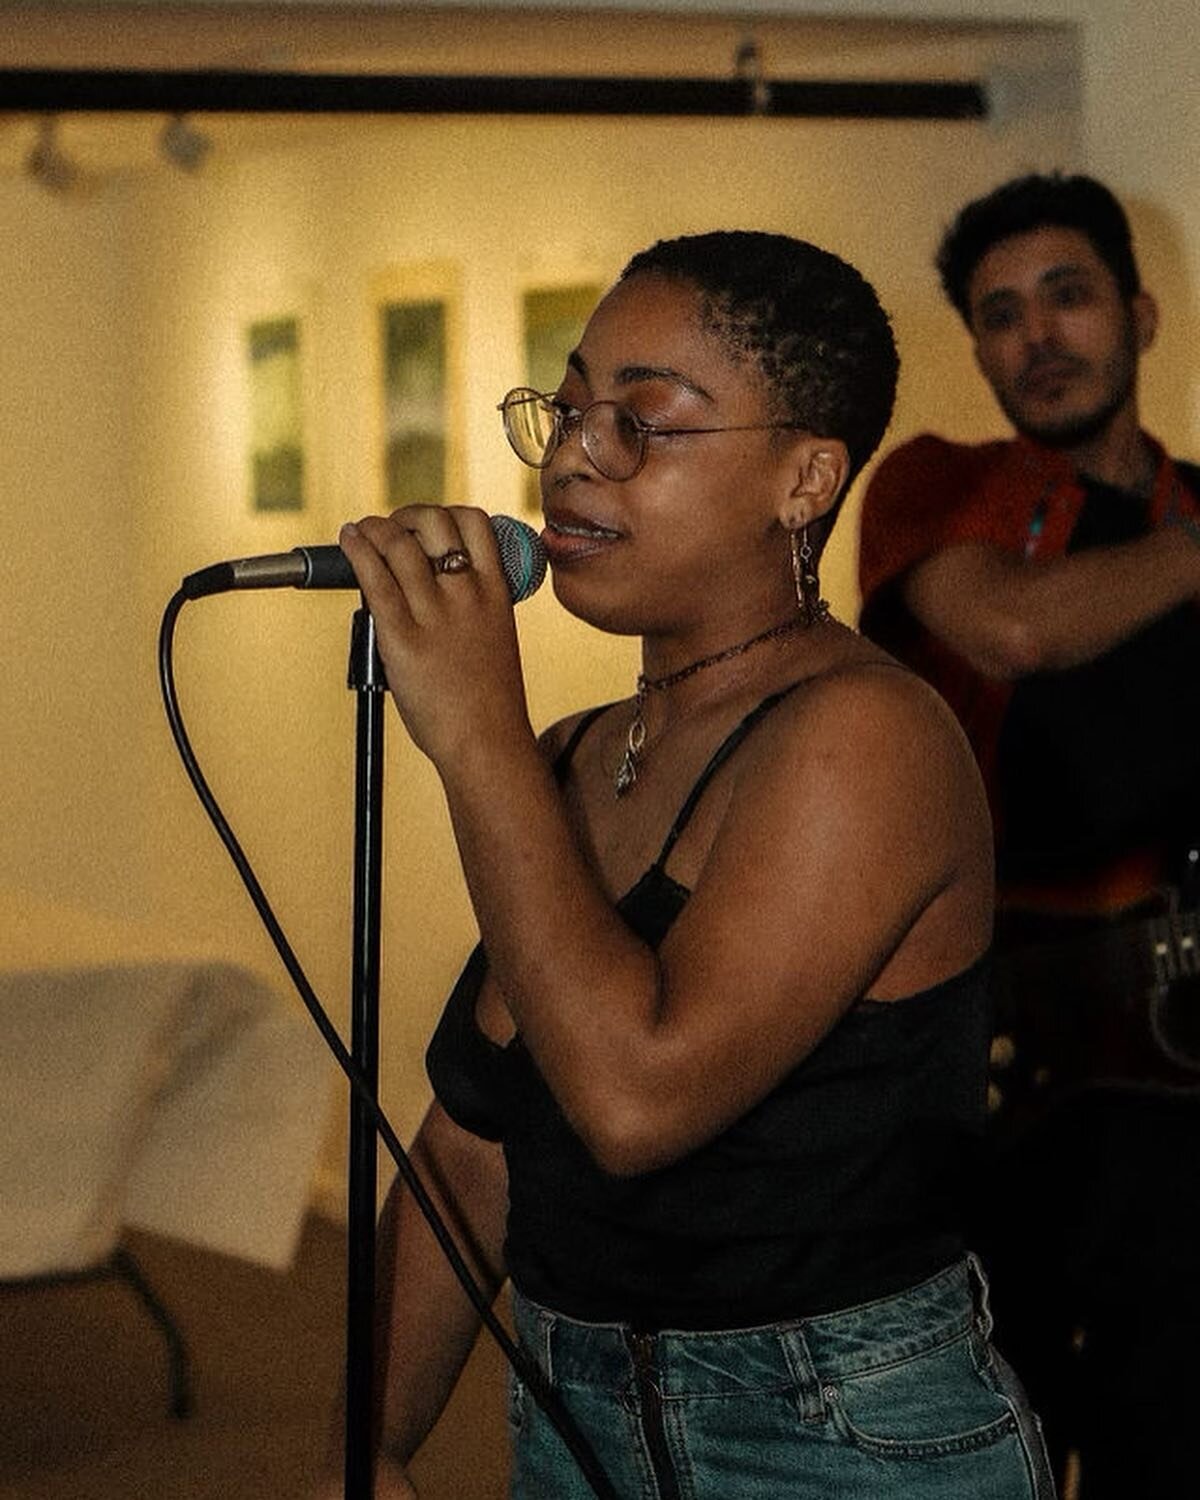 Listen, if someone said I don&rsquo;t put my whole ✨ pussy ✨ into my performances&hellip; they LIED!!! No but seriously, this was one of the most fulfilling events I&rsquo;ve done in a long time. Such powerful art, community, and celebration of life.